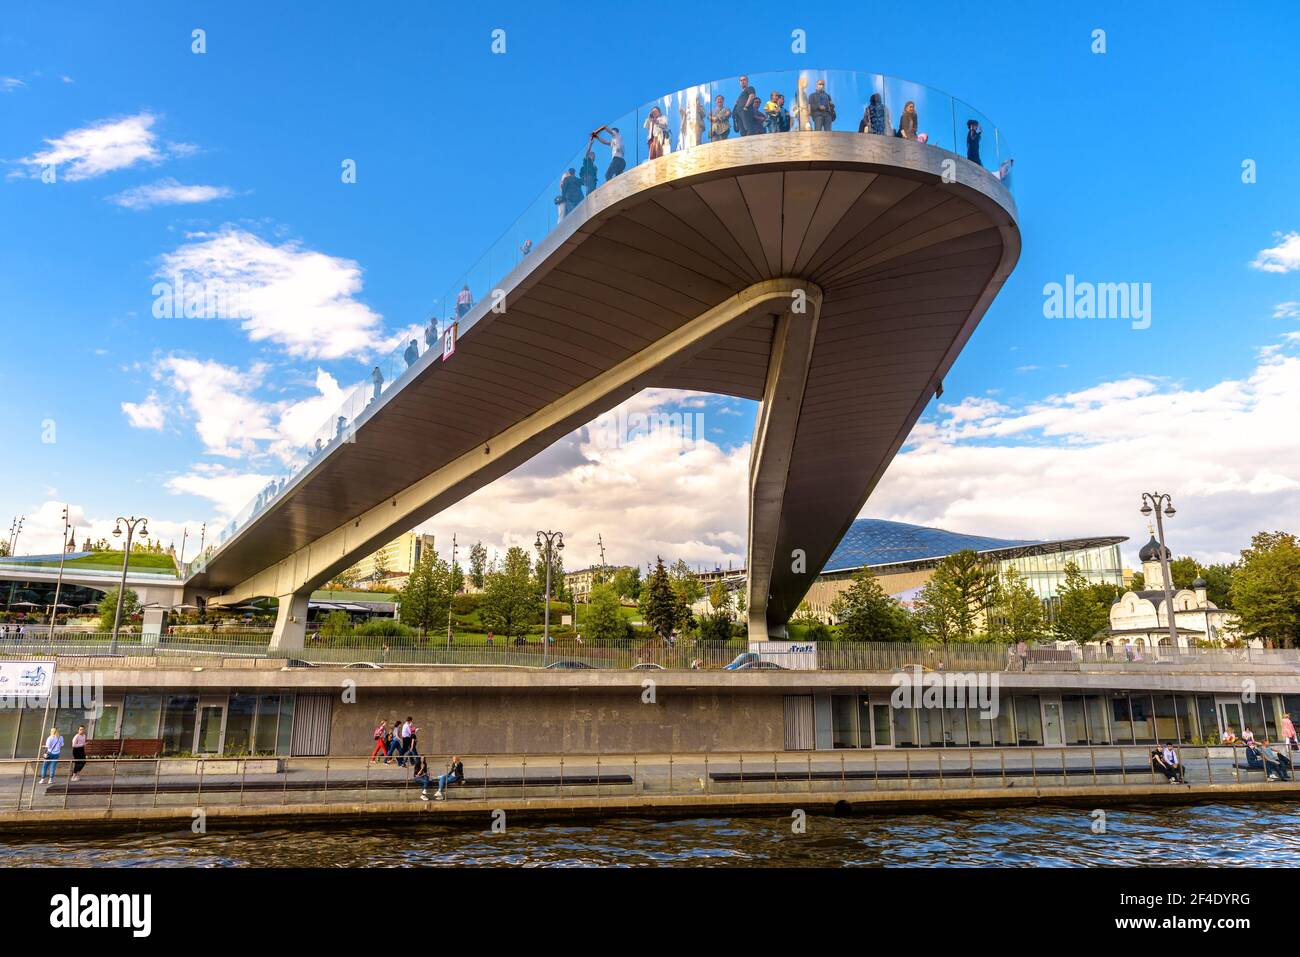 Moscow - Aug 21, 2020: Floating bridge in Zaryadye Park, Moscow, Russia. This place is famous tourist attractions of city. People stand on amazing urb Stock Photo